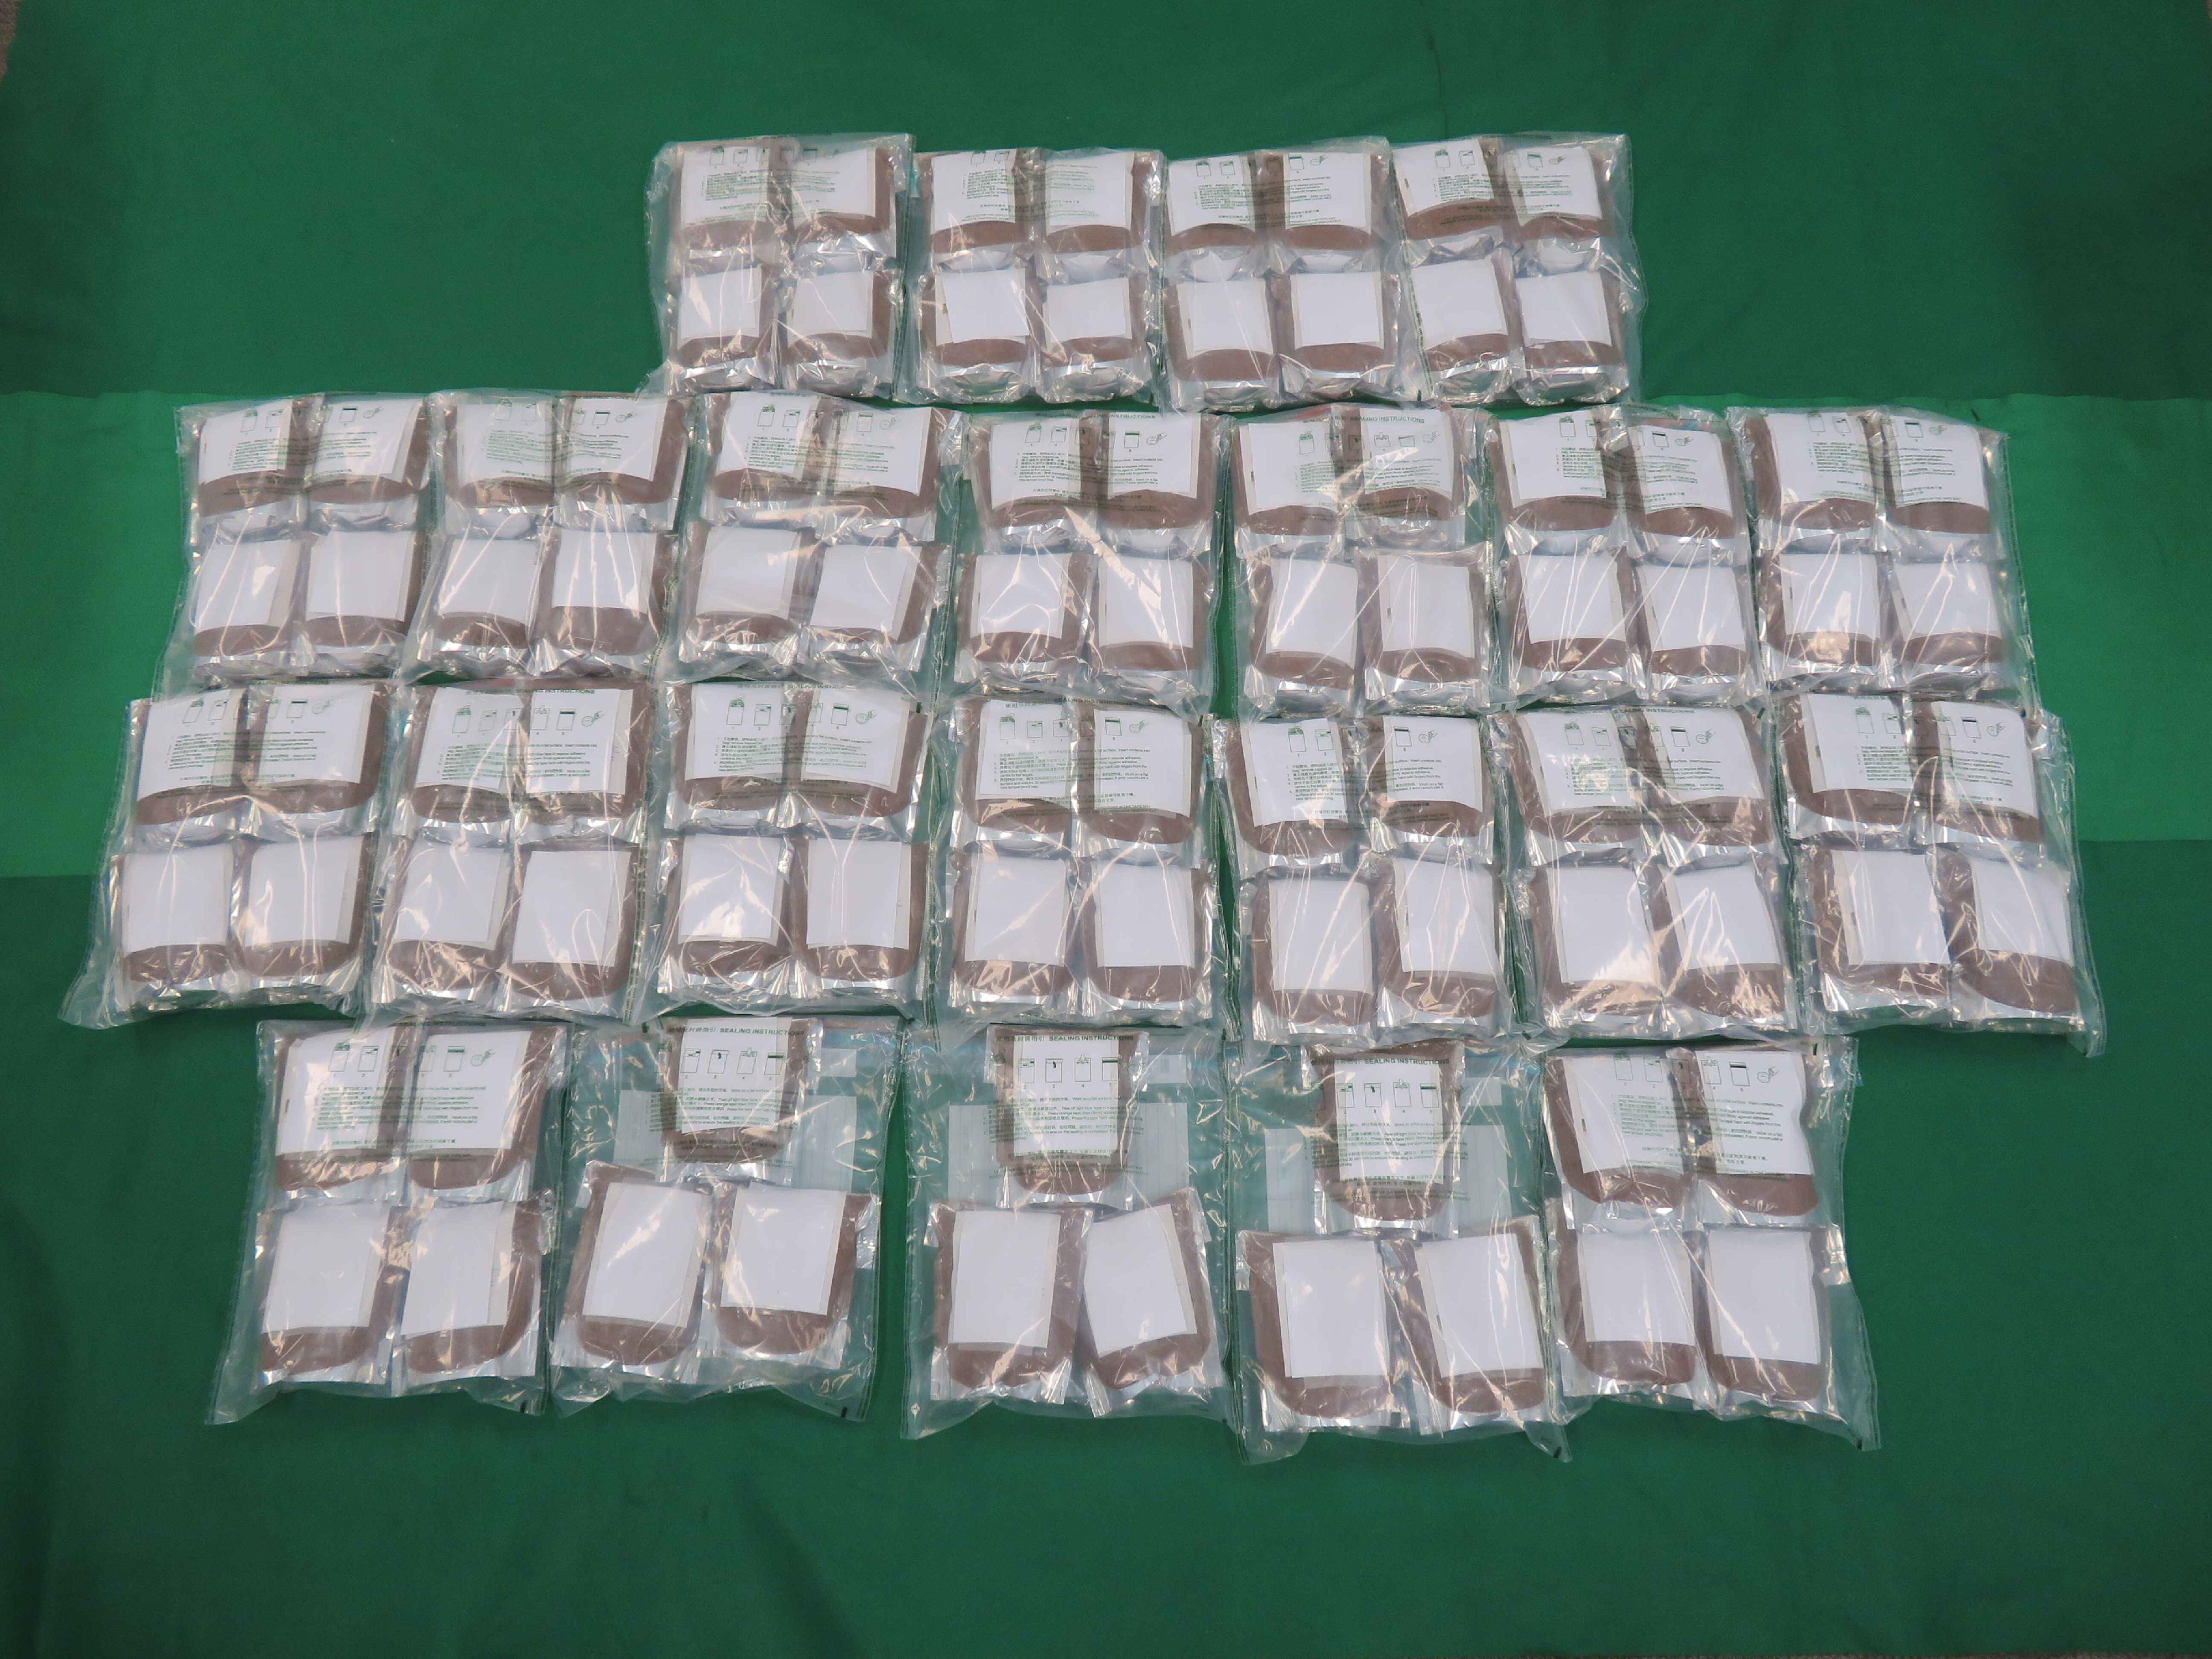 Hong Kong Customs on January 17 seized about 36 kilograms of suspected methamphetamine with an estimated market value of about $25 million in Tsing Yi. Photo shows the suspected methamphetamine seized.

